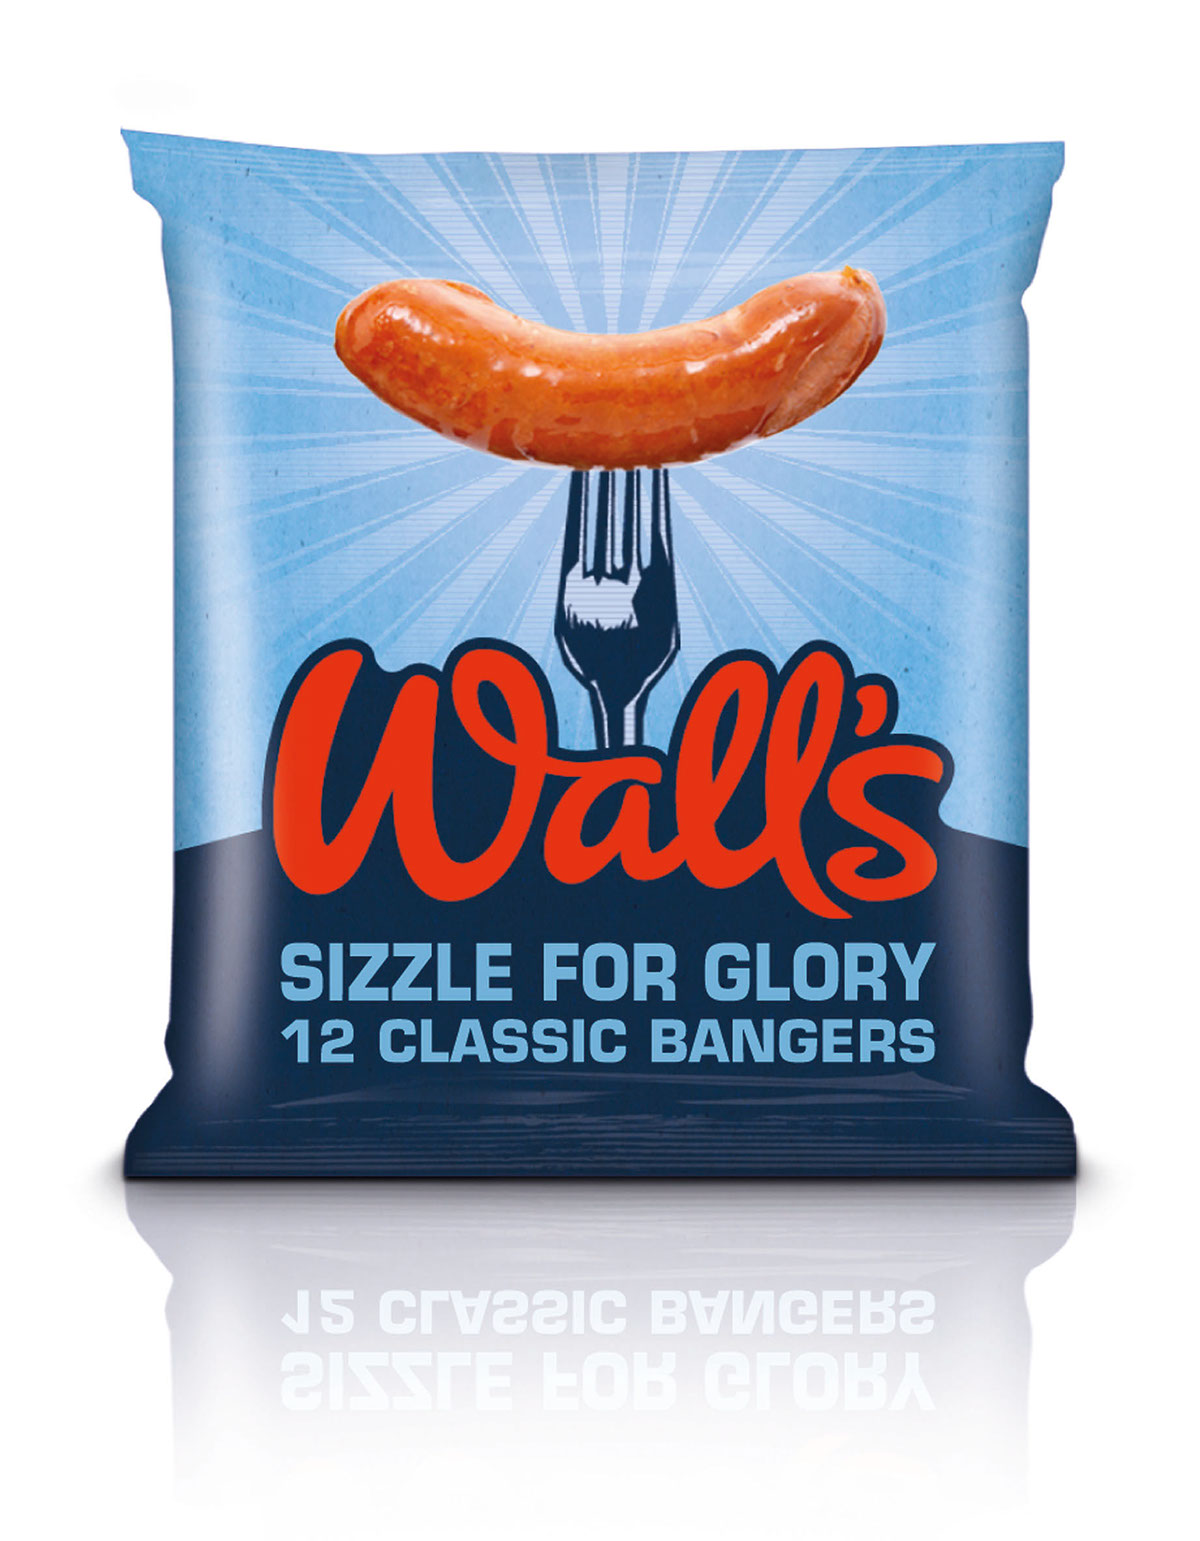 sausages sausage roll snacking walls KERRY FOODS Springetts relaunch Repositioning